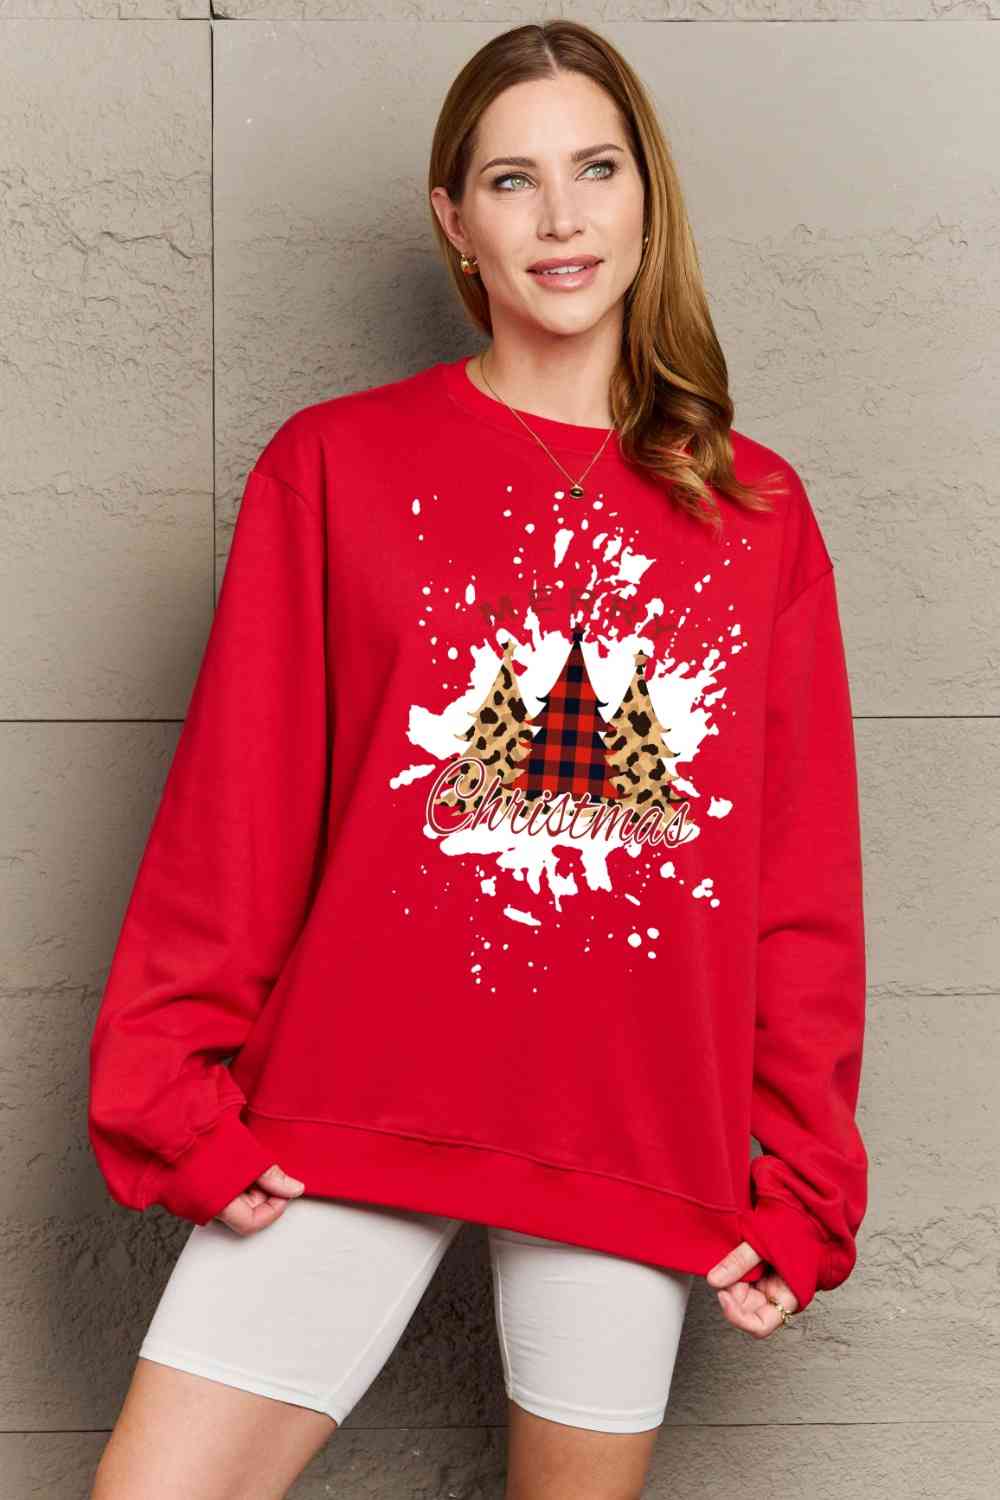 Simply Love Full Size MERRY CHRISTMAS Graphic Sweatshirt - Guy Christopher